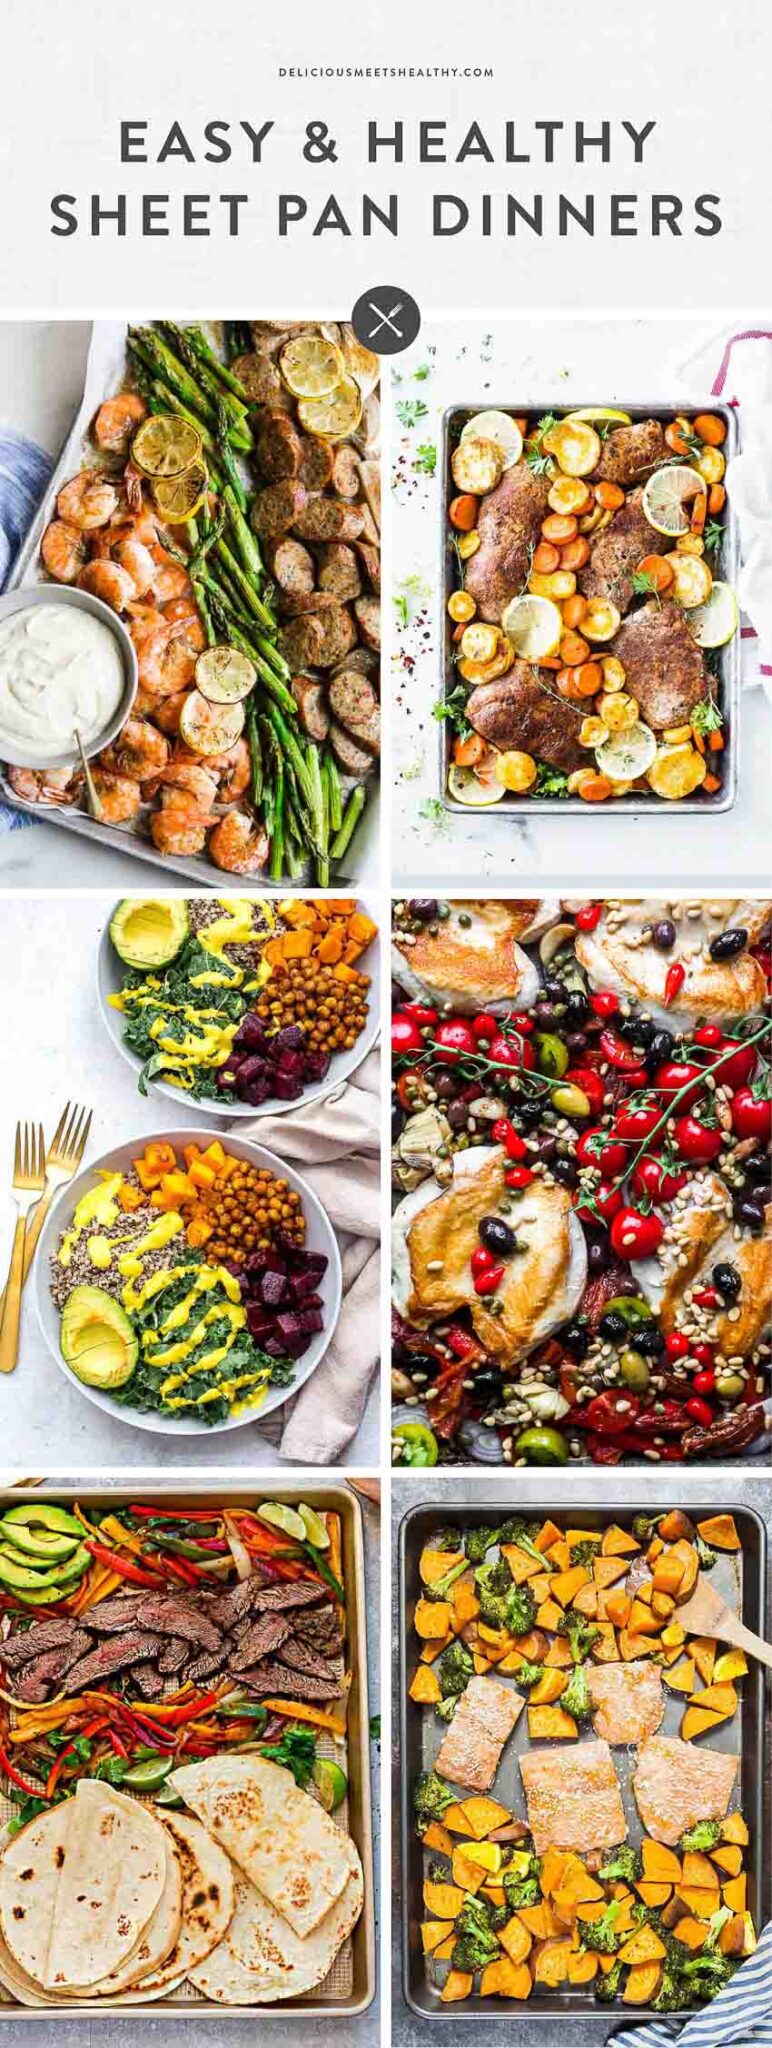 https://www.deliciousmeetshealthy.com/wp-content/uploads/2020/02/Sheet-Pan-Dinners-1-scaled.jpg